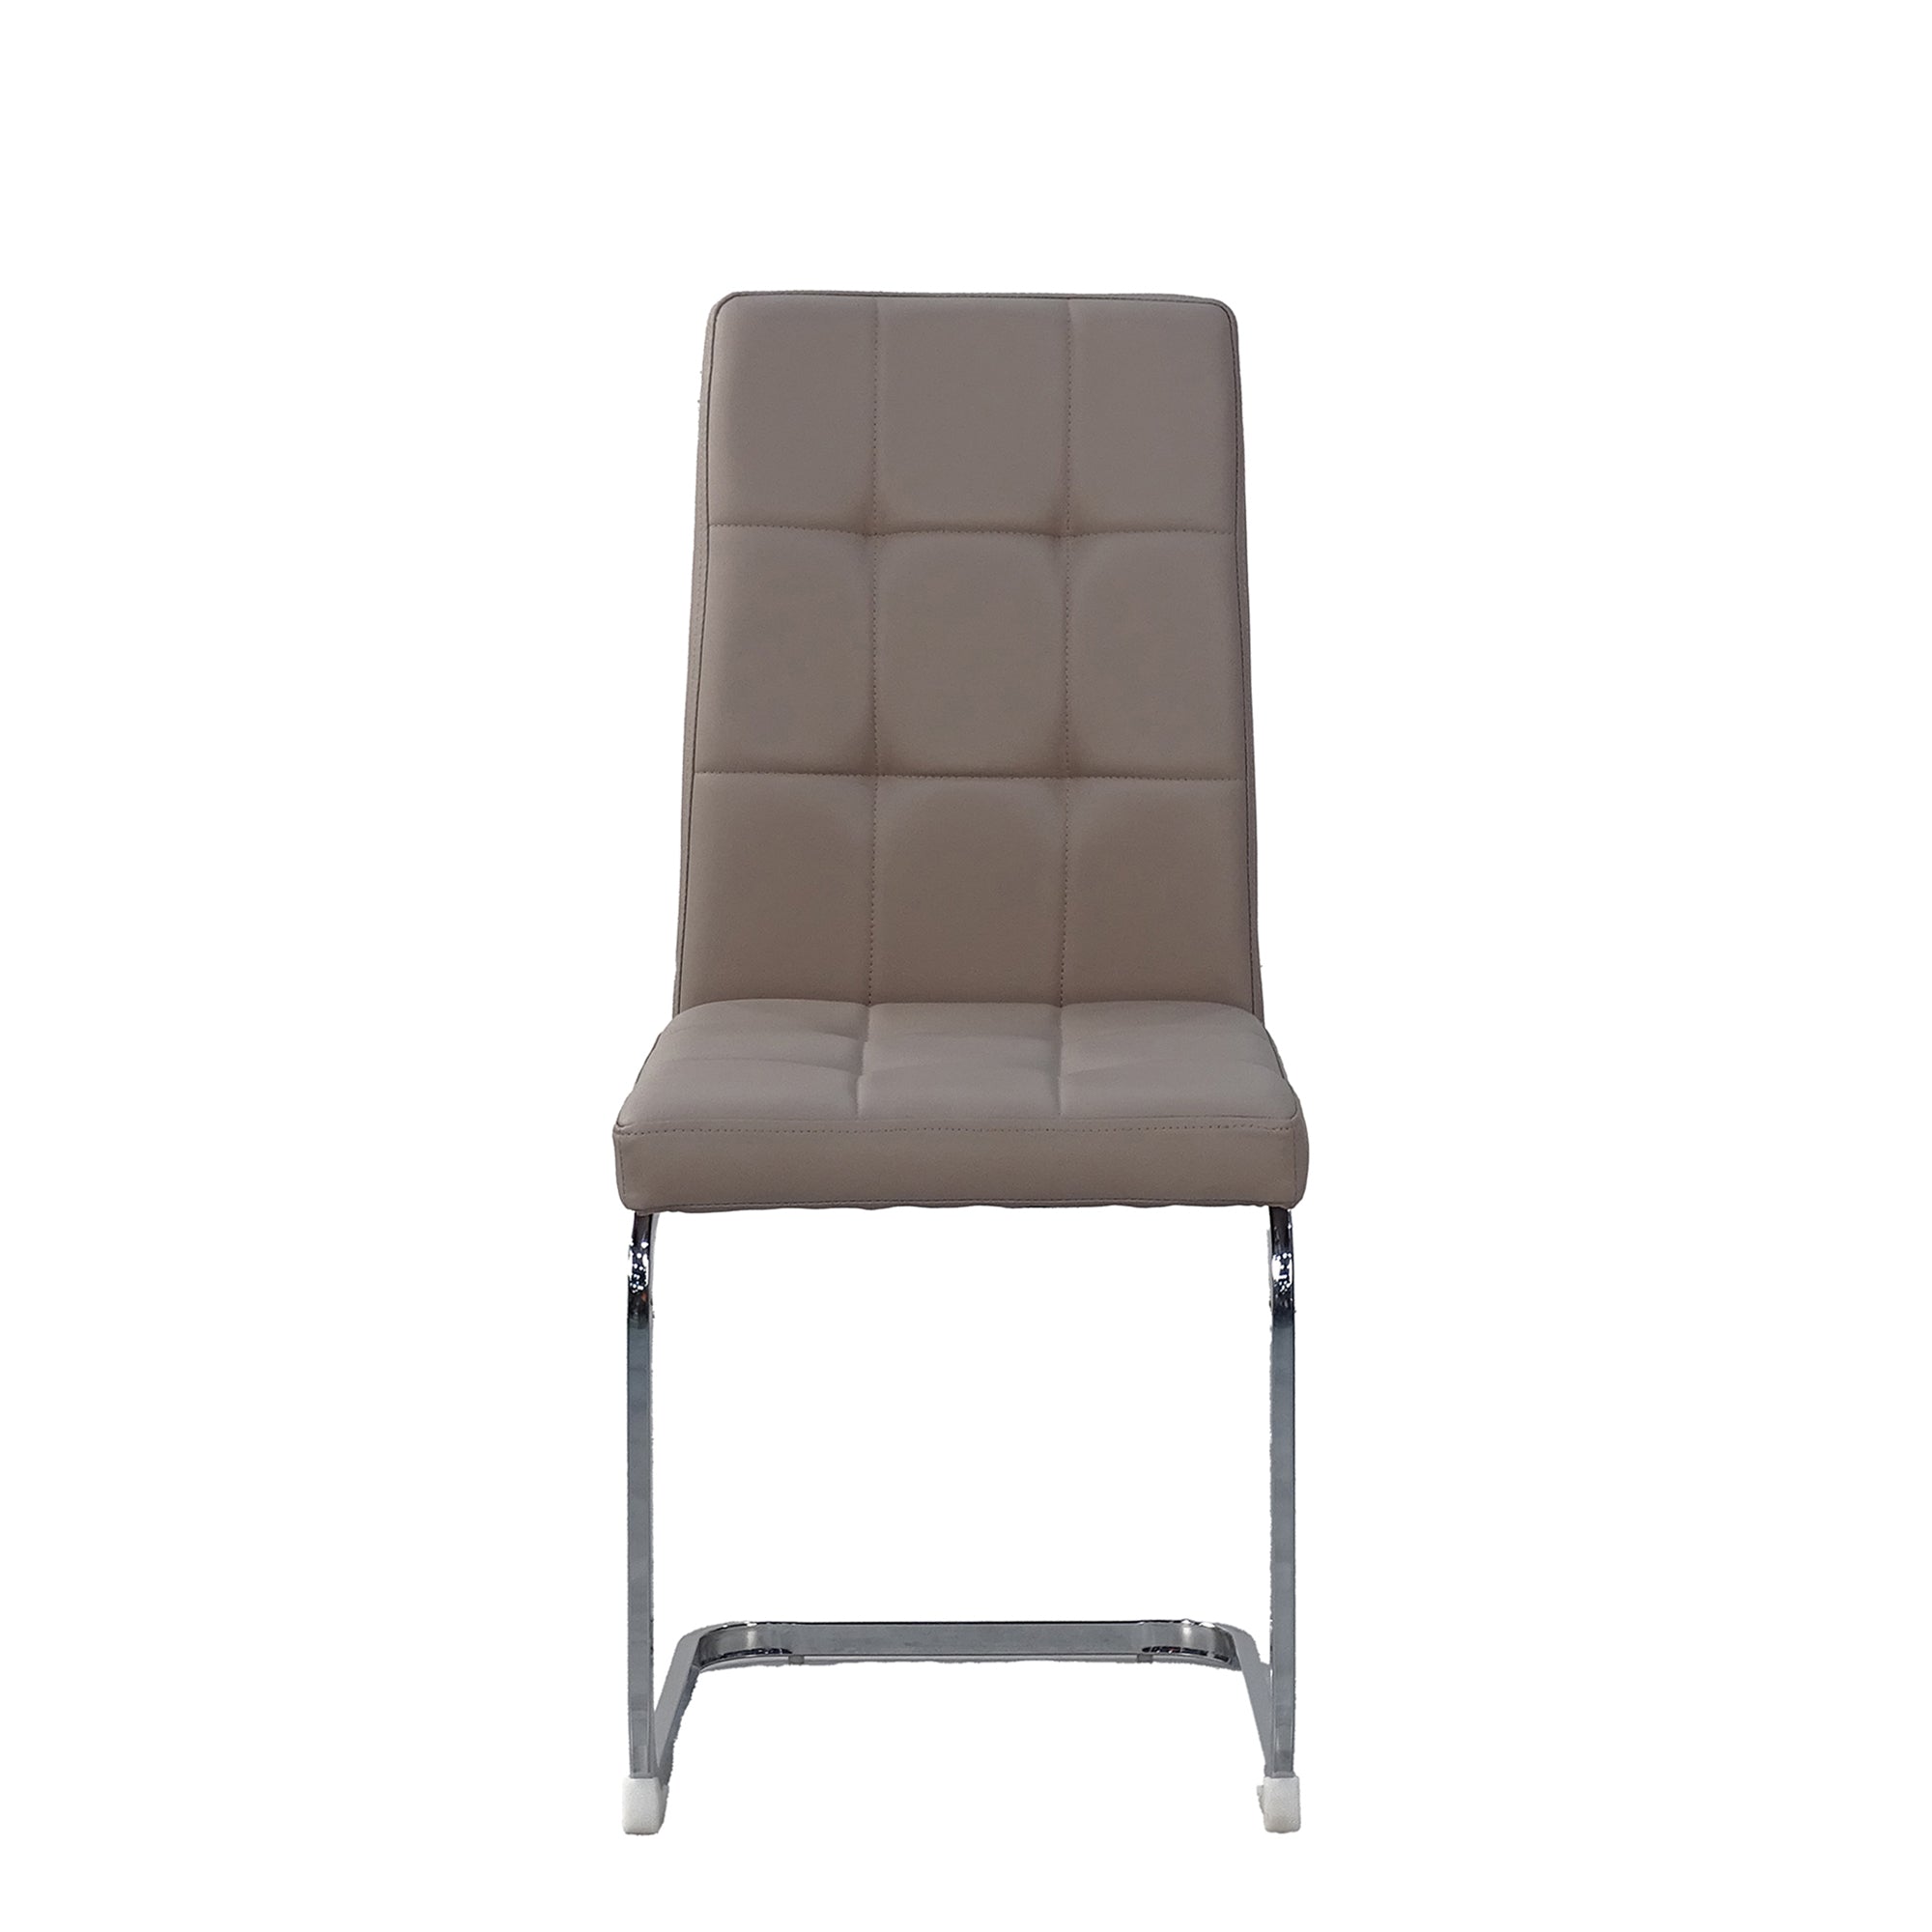 Lucas - Cantilever Dining Chair In PU With Chrome Base Taupe